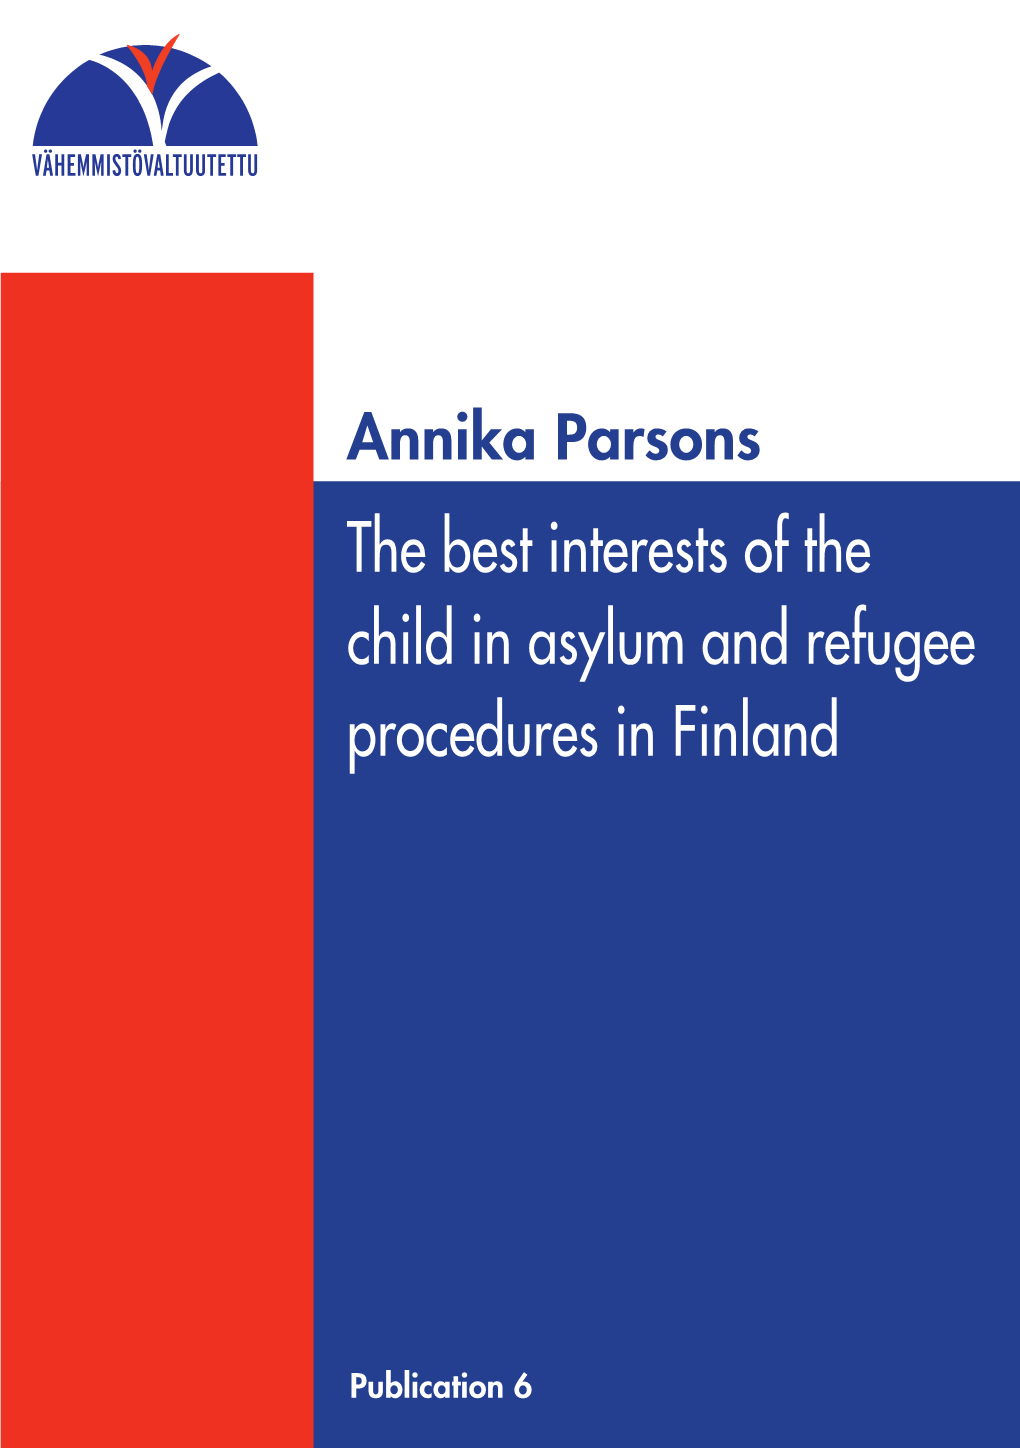 The Best Interests of the Child in Asylum and Refugee Procedures in Finland